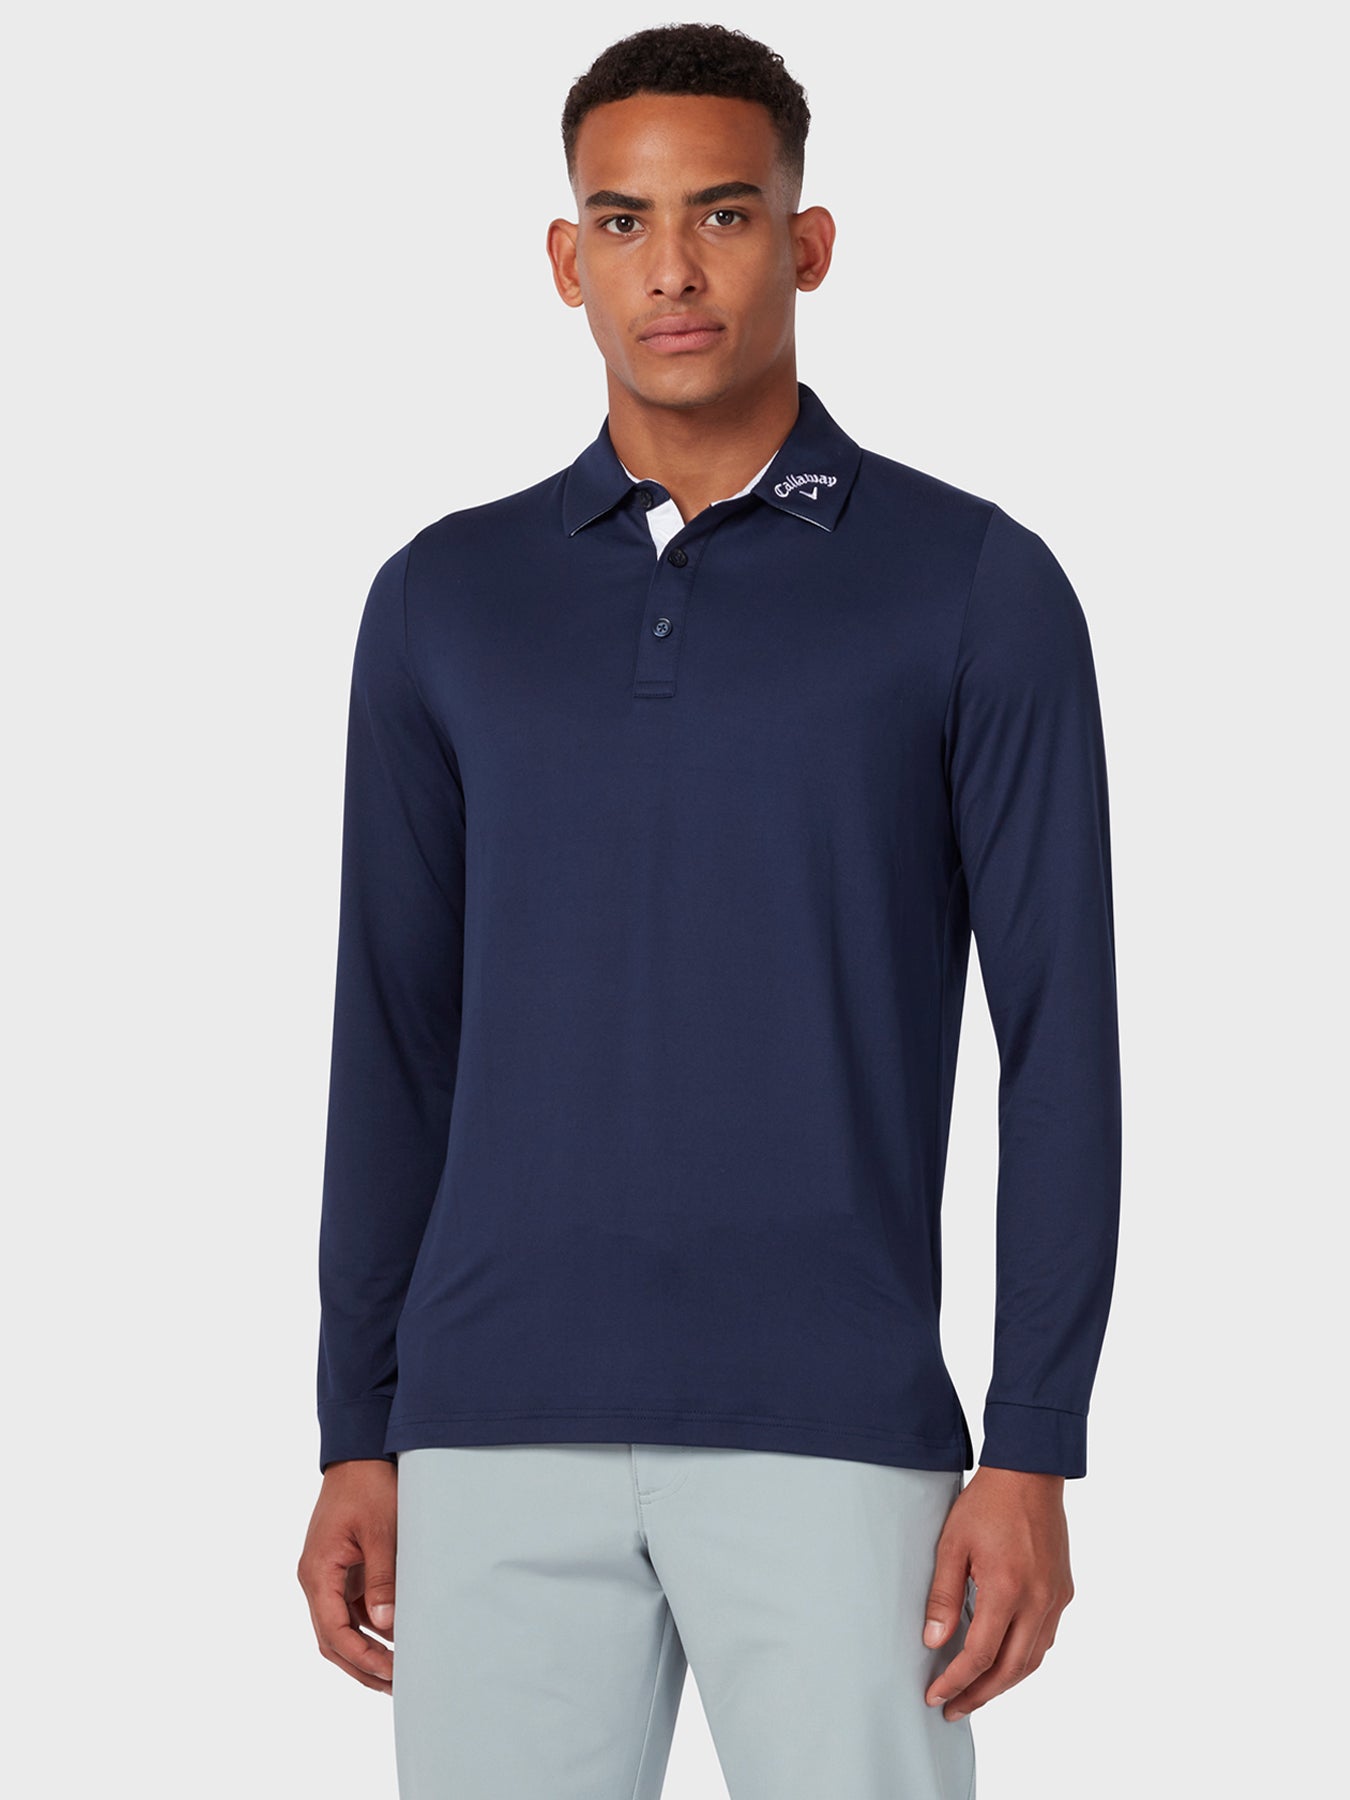 View Long Sleeve Performance Polo In Peacoat Peacoat XXL information